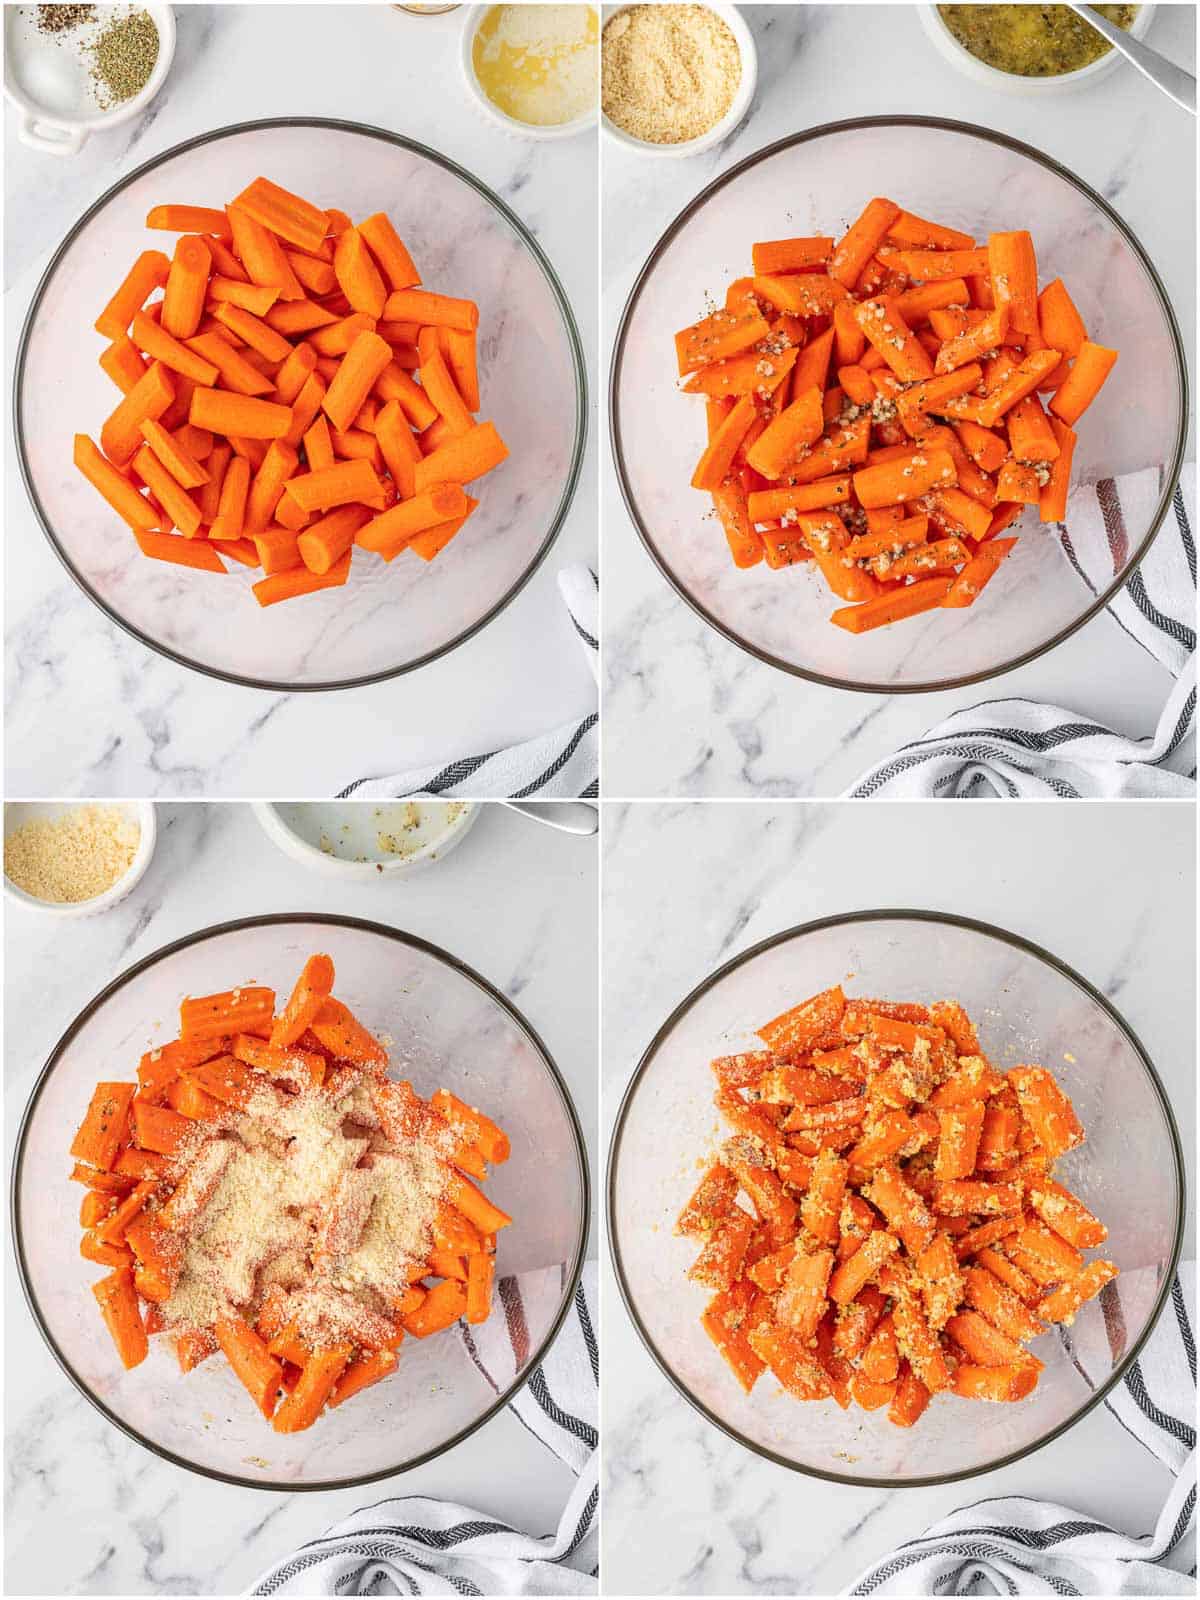 How to cut and season carrots for oven roasting.